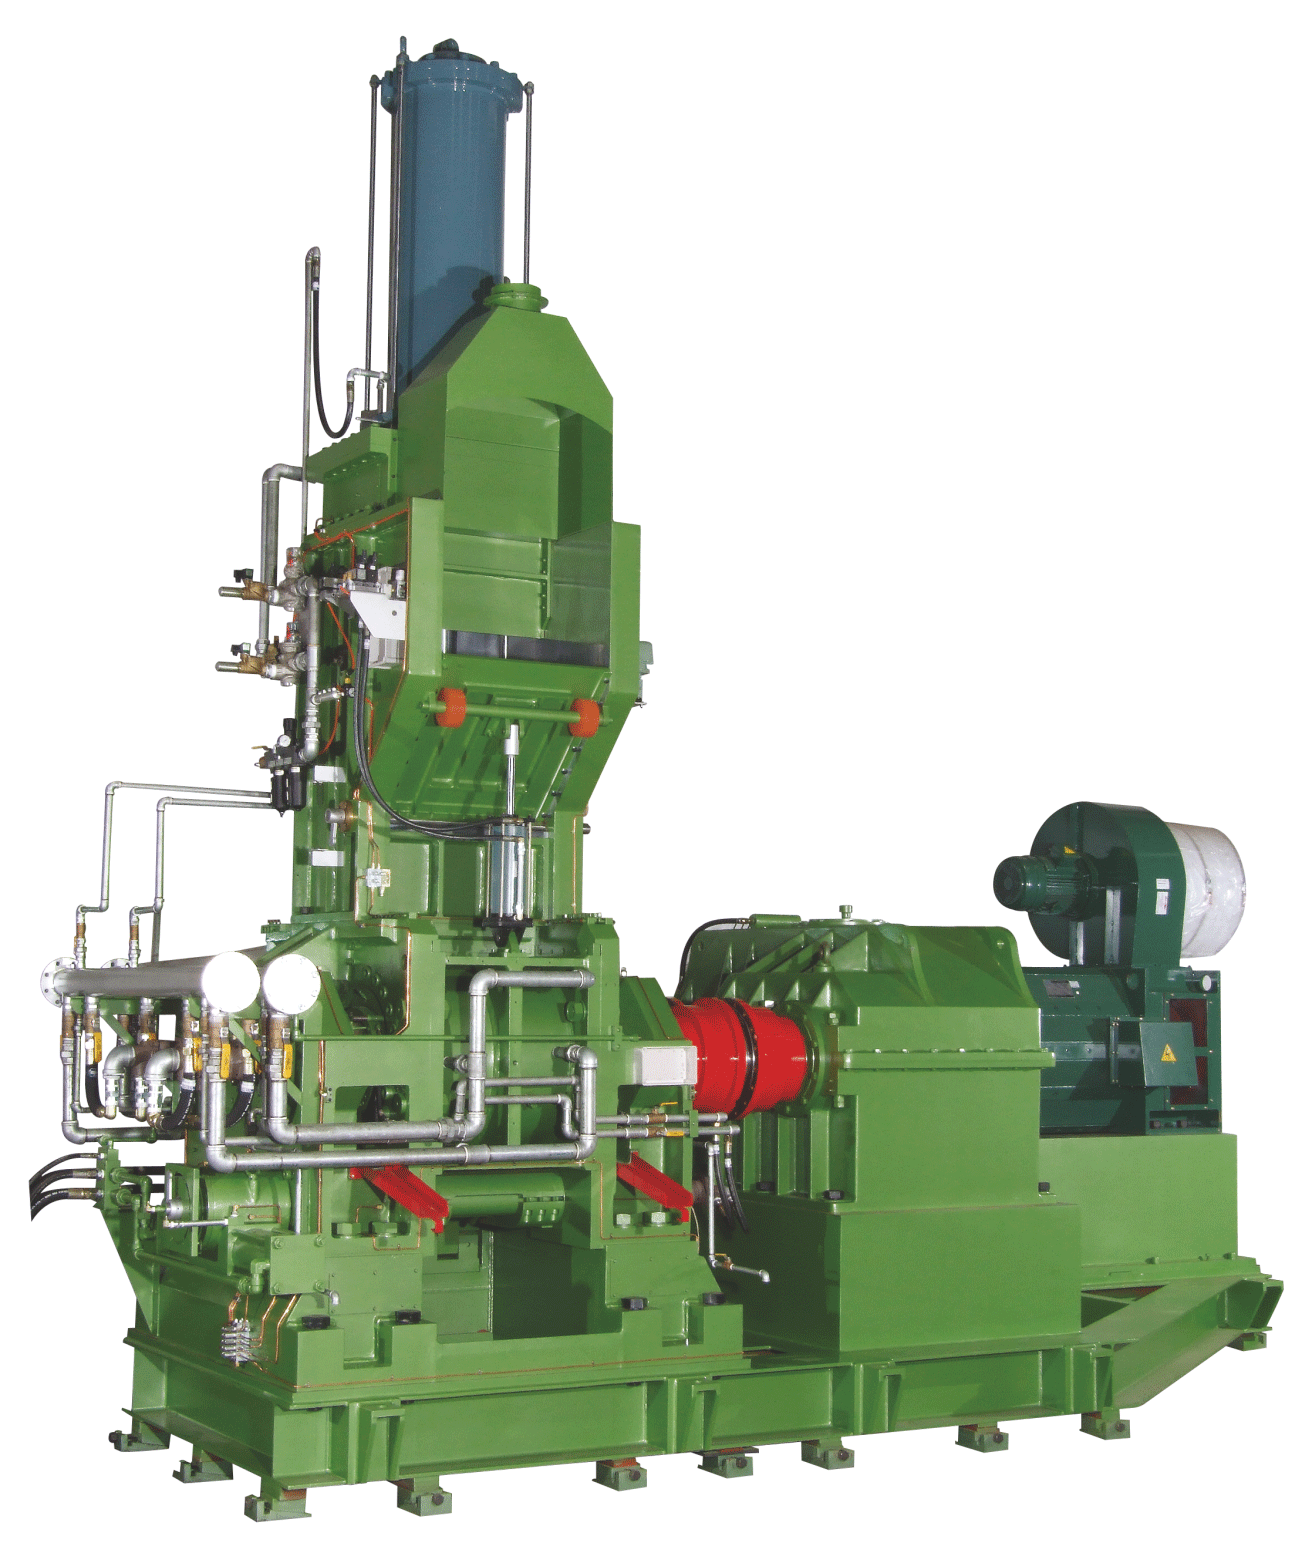 PHM-200 Closed-Type Intensive Mixer for Rubber and Plastic Products